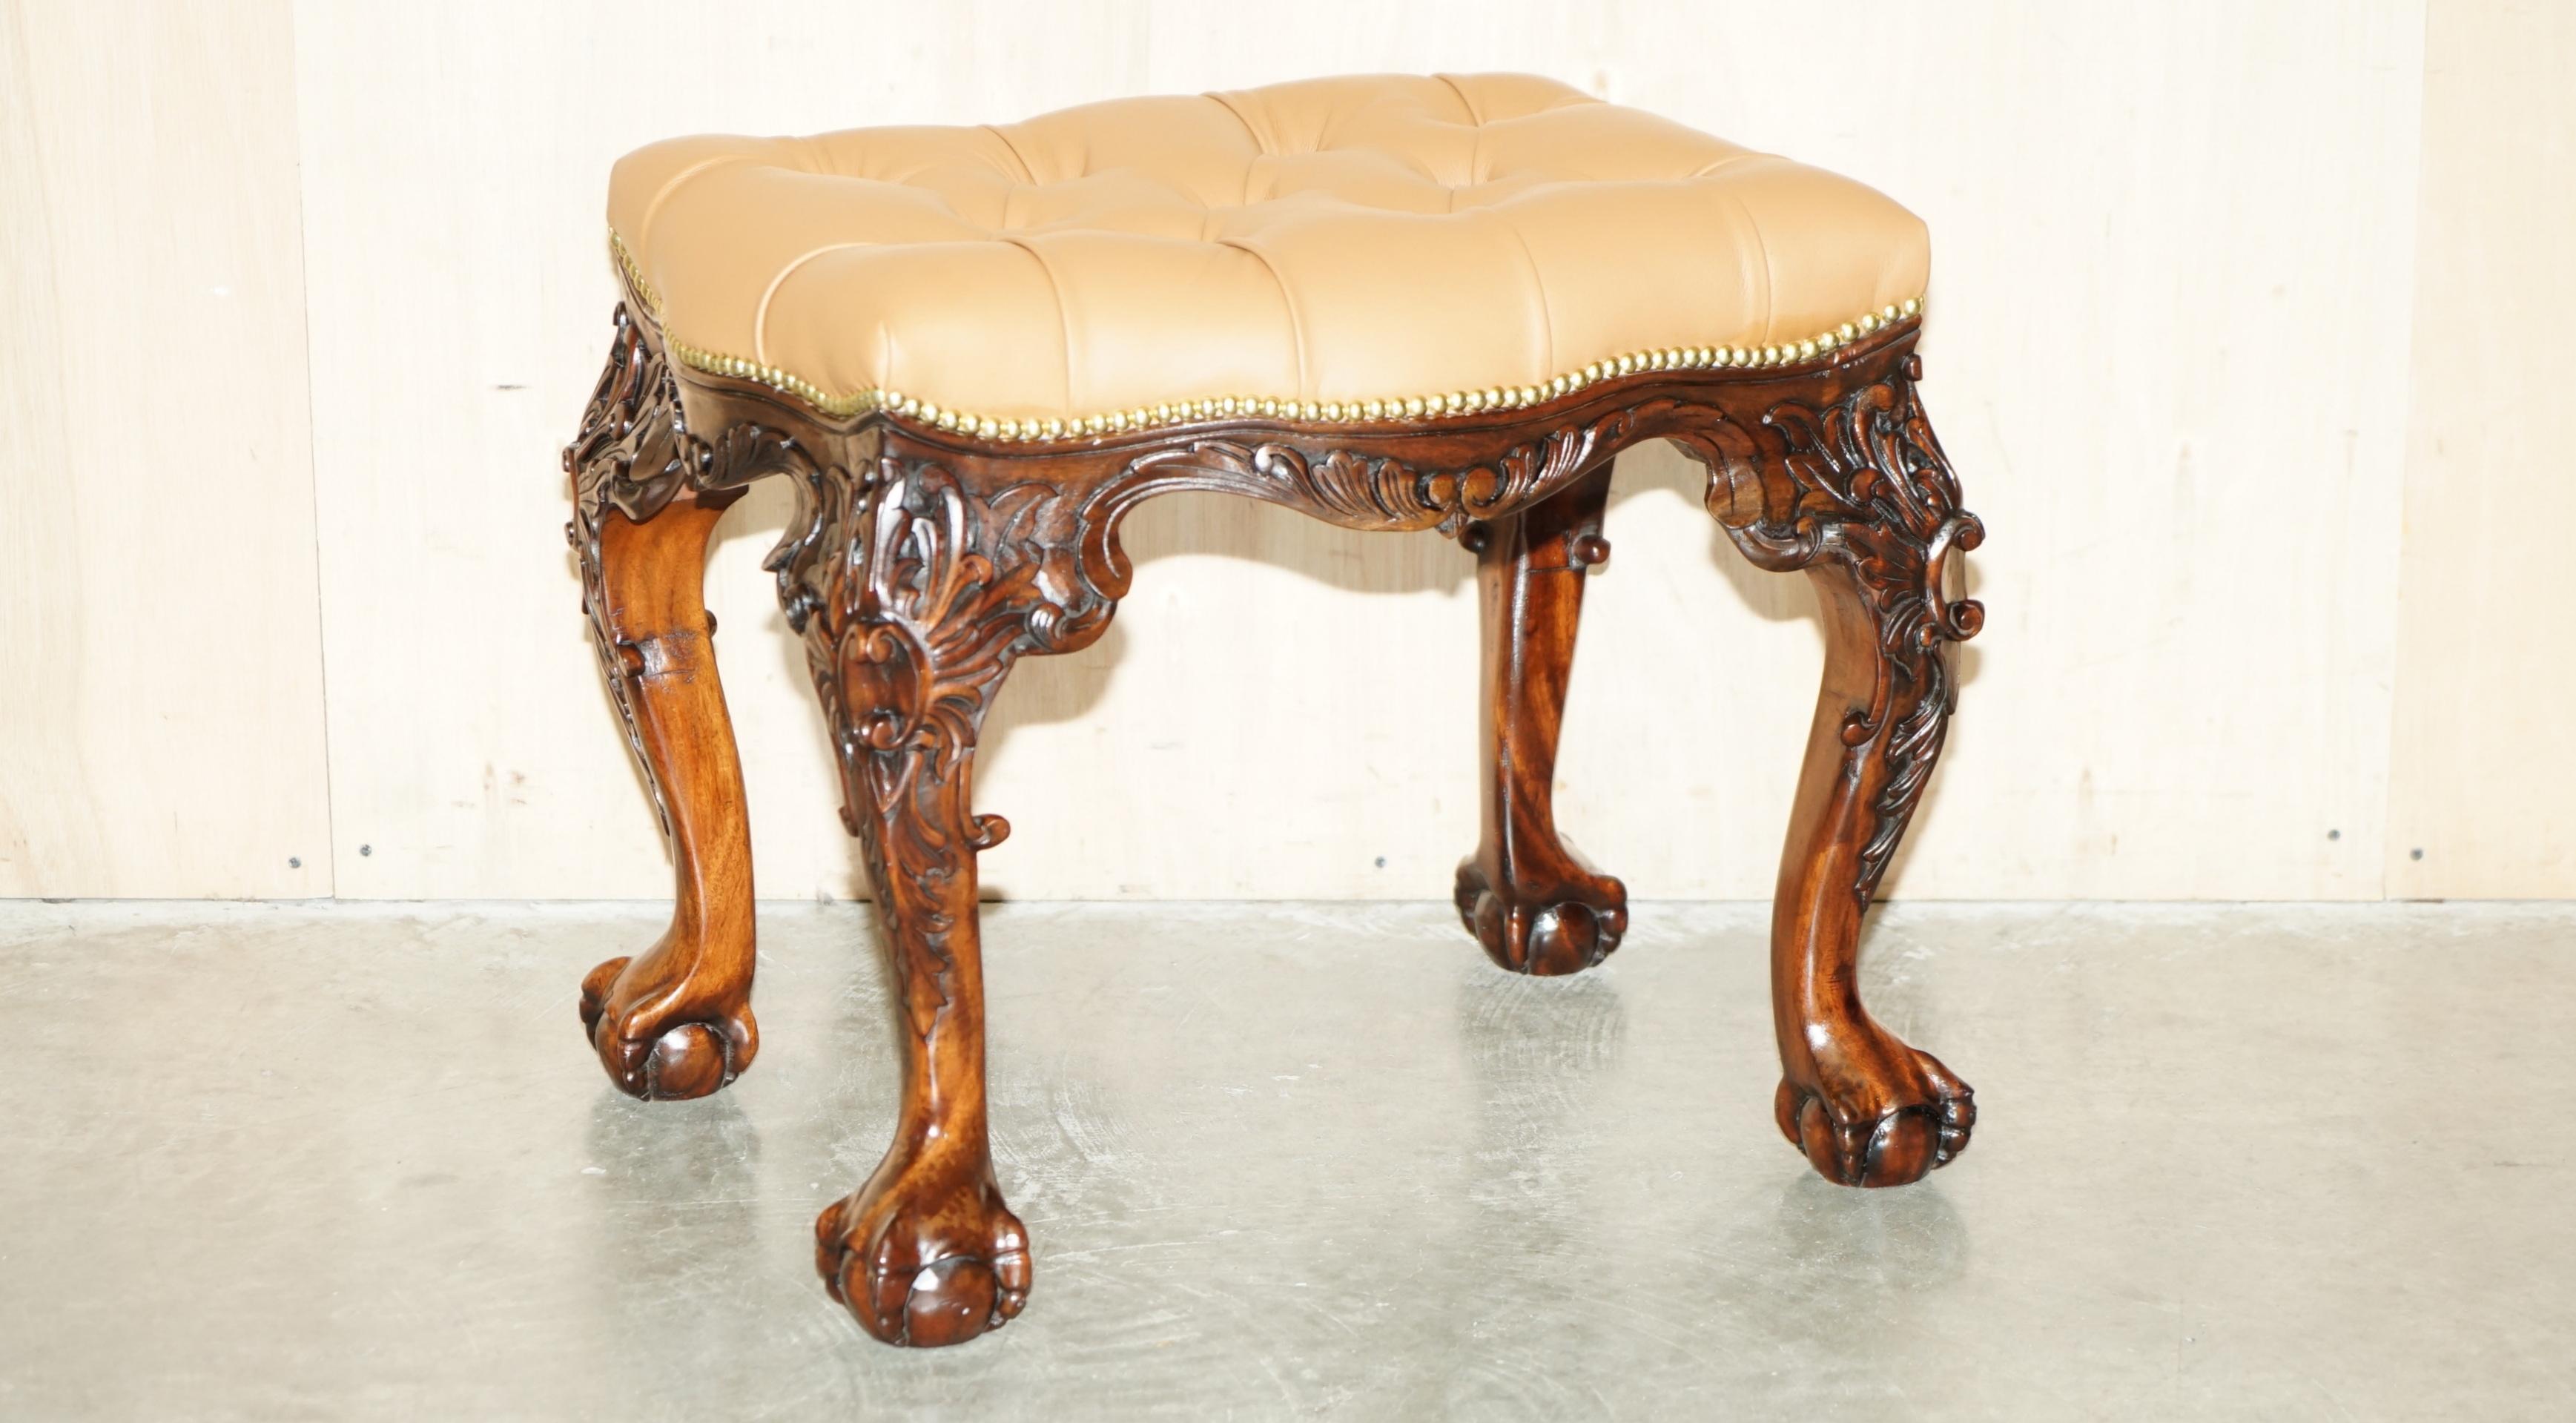 Royal House Antiques

Royal House Antiques is delighted to offer for sale this exquisite fully restored circa 1920 hand carved Piano or Dressing table stool with Chesterfield tufted tan brown leather upholstery and ornately carved Claw & Ball